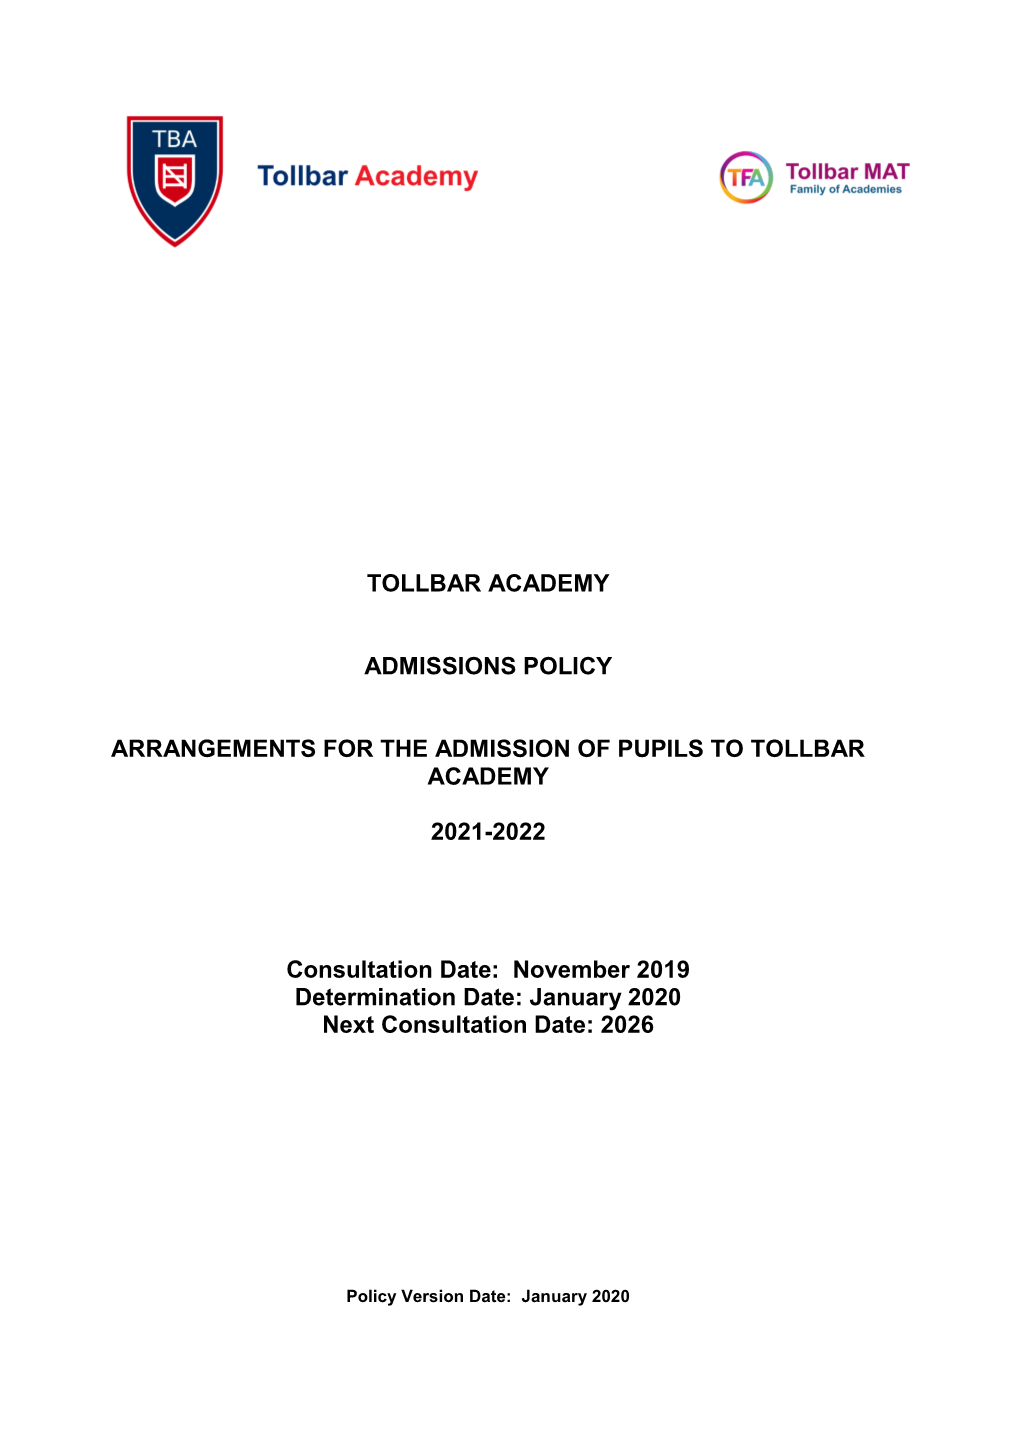 Tollbar Academy Admissions Policy 2021-2022